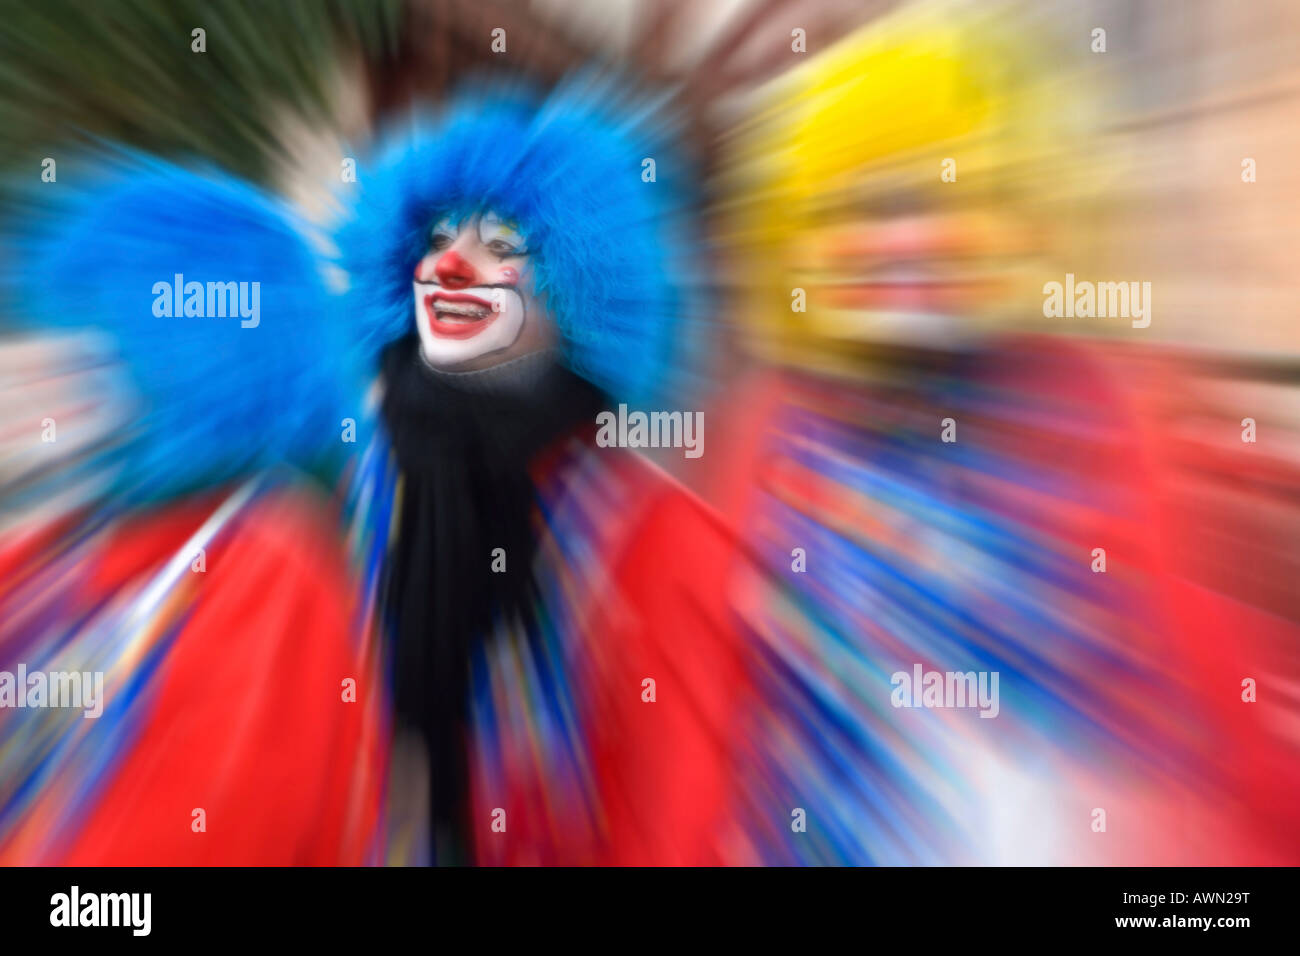 Person wearing clown costume, carnival parade, Hesse, Germany, Europe Stock Photo